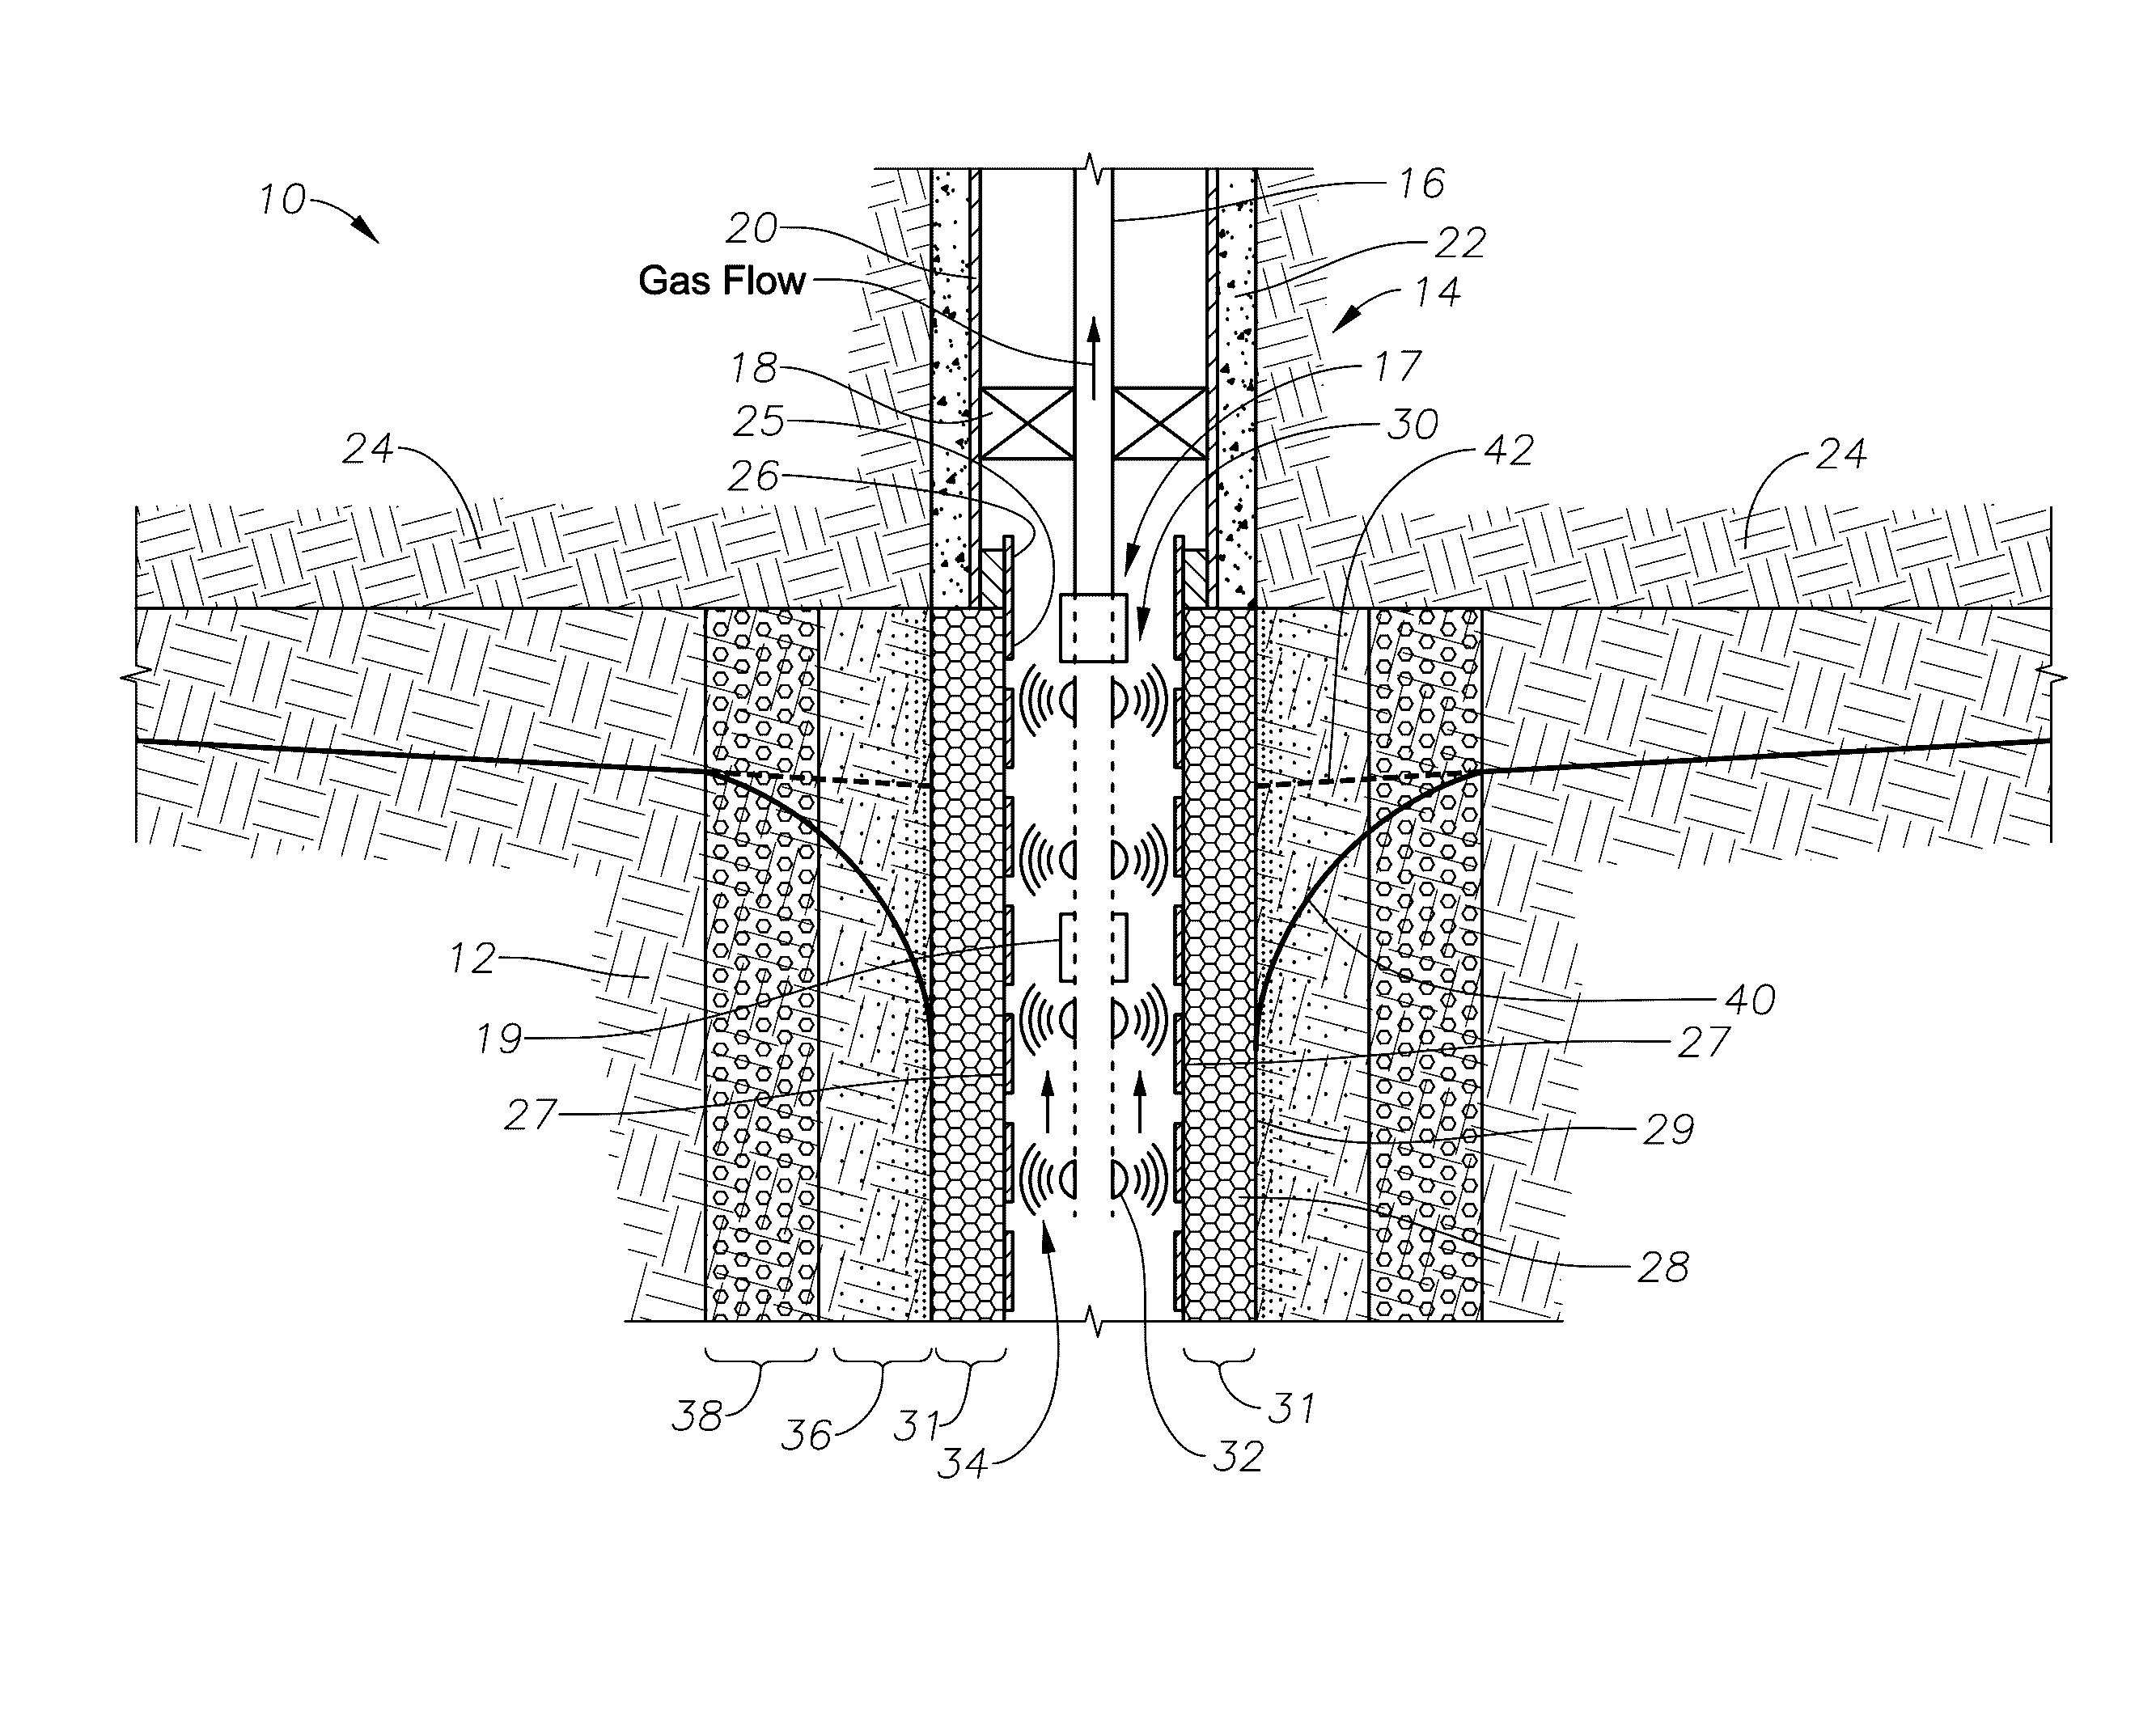 System and Method For Condensate Blockage Removal With Ceramic Material and Microwaves